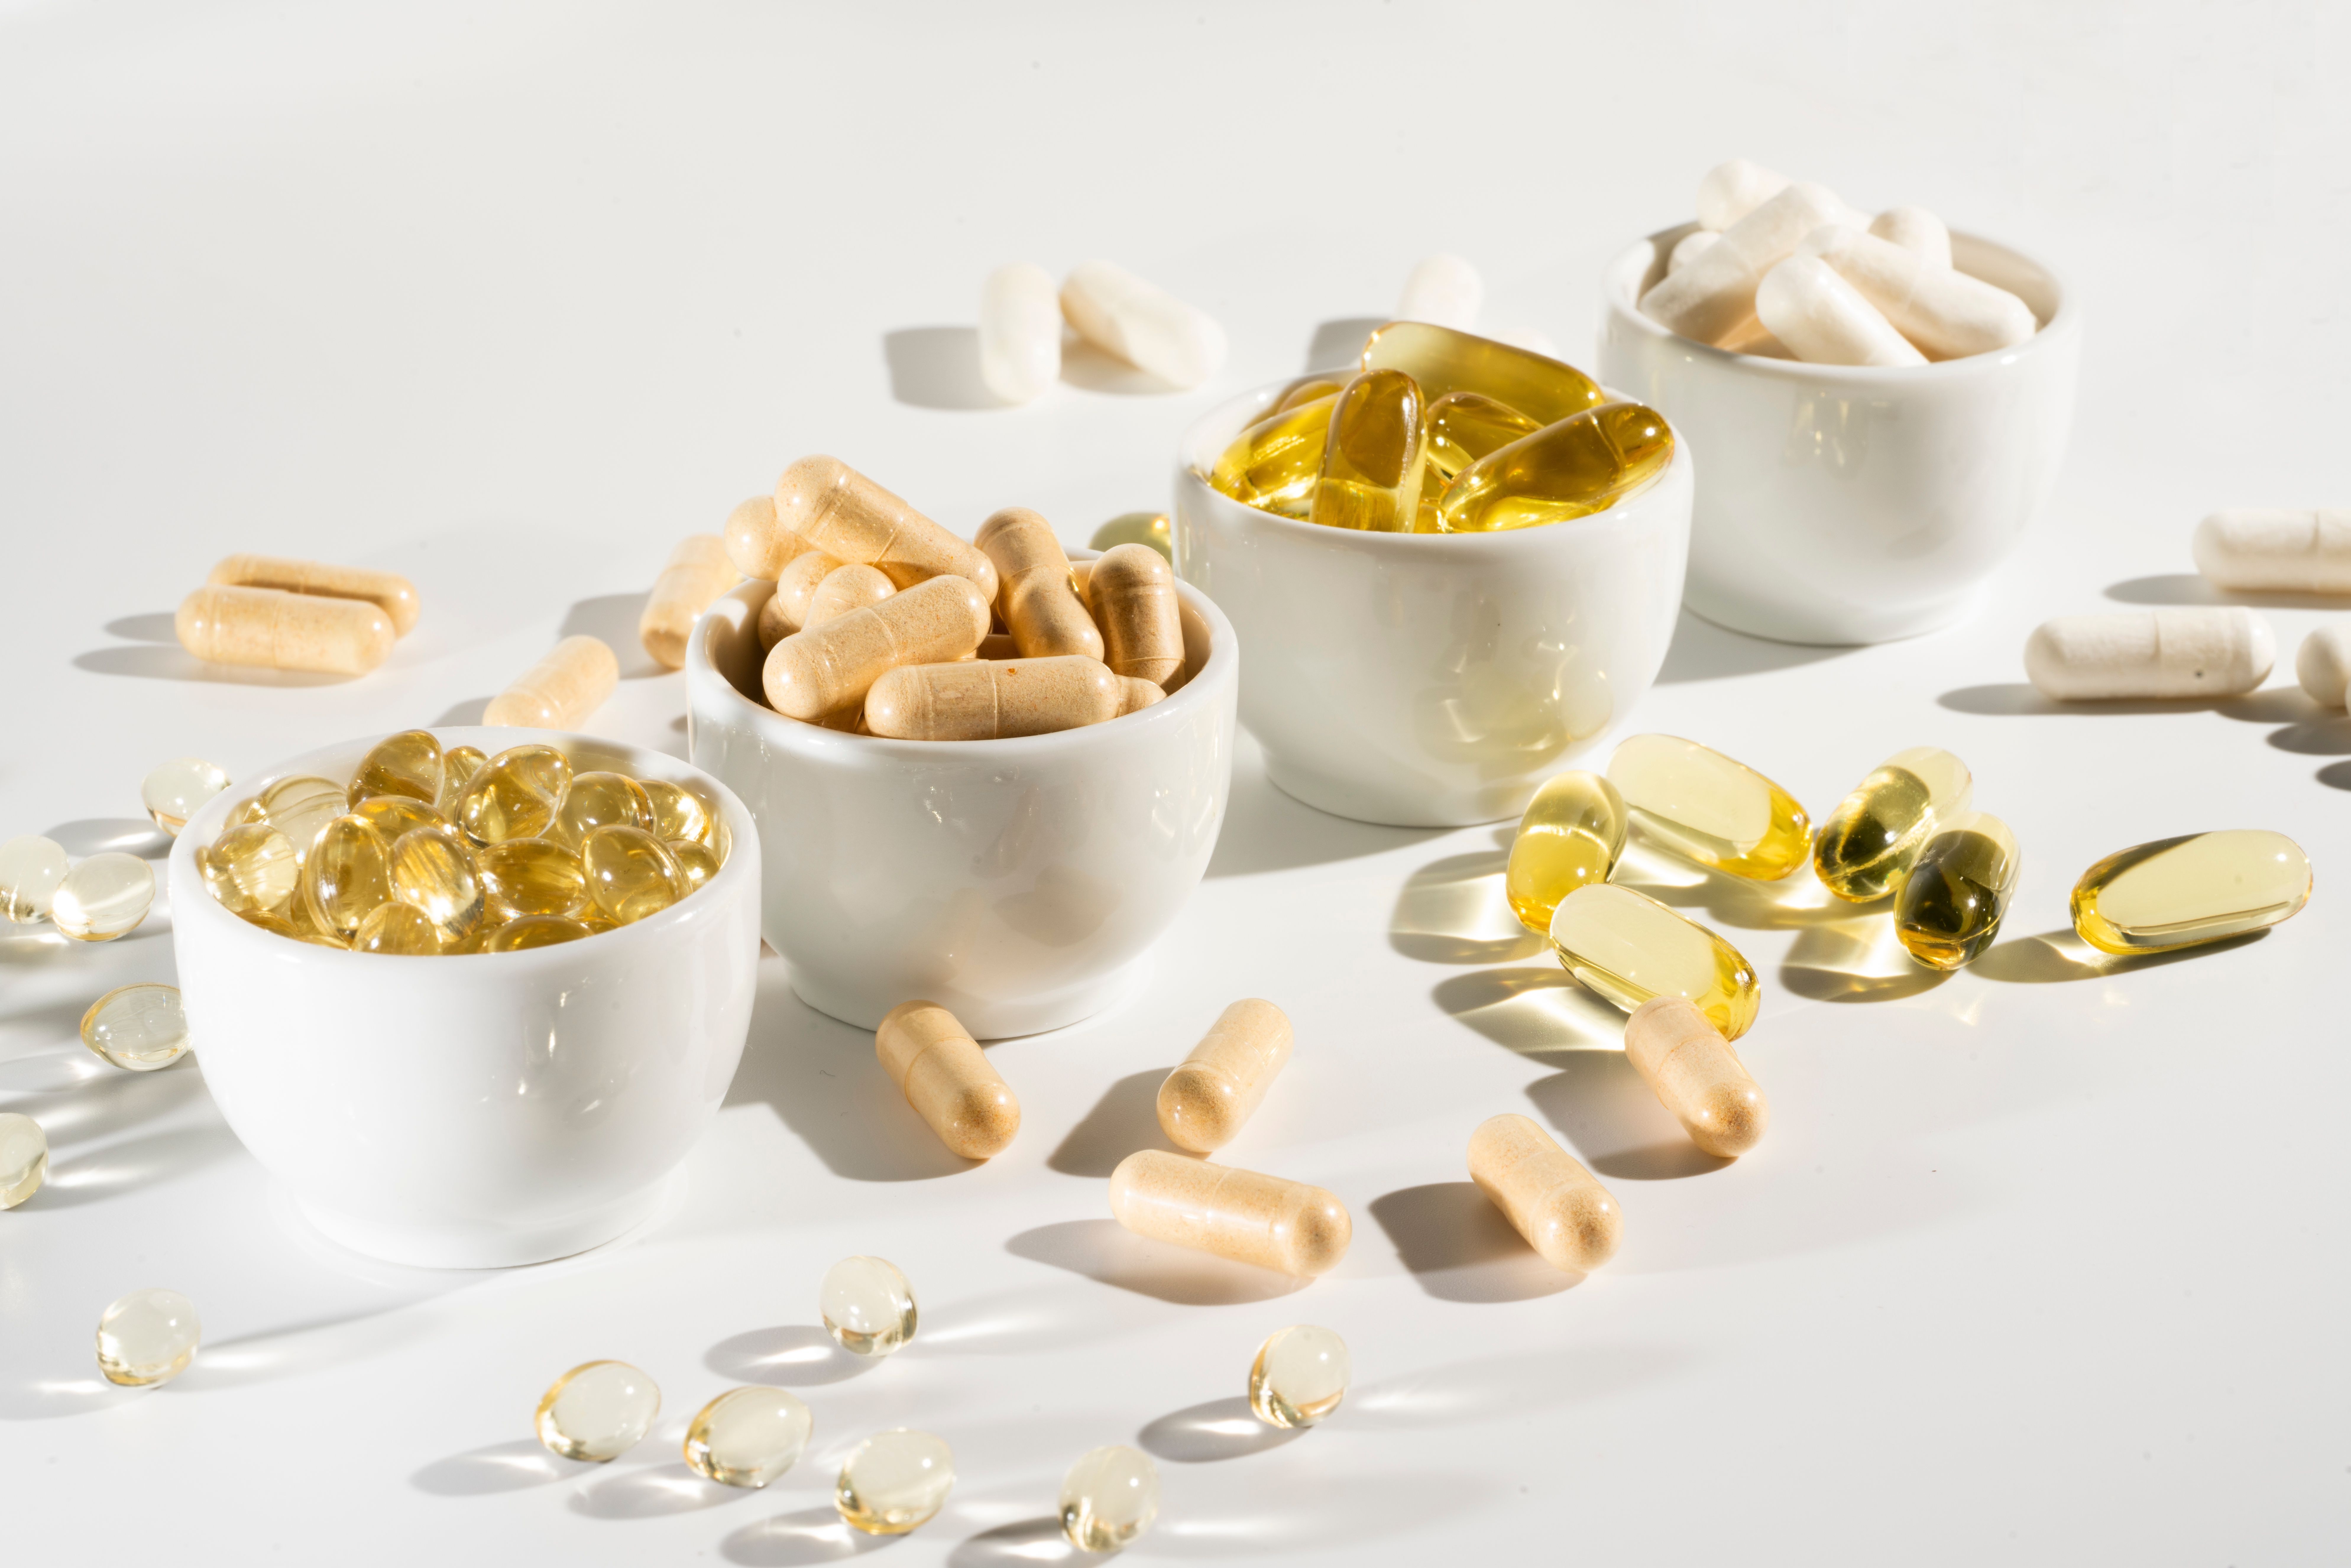 supplements in small bowls